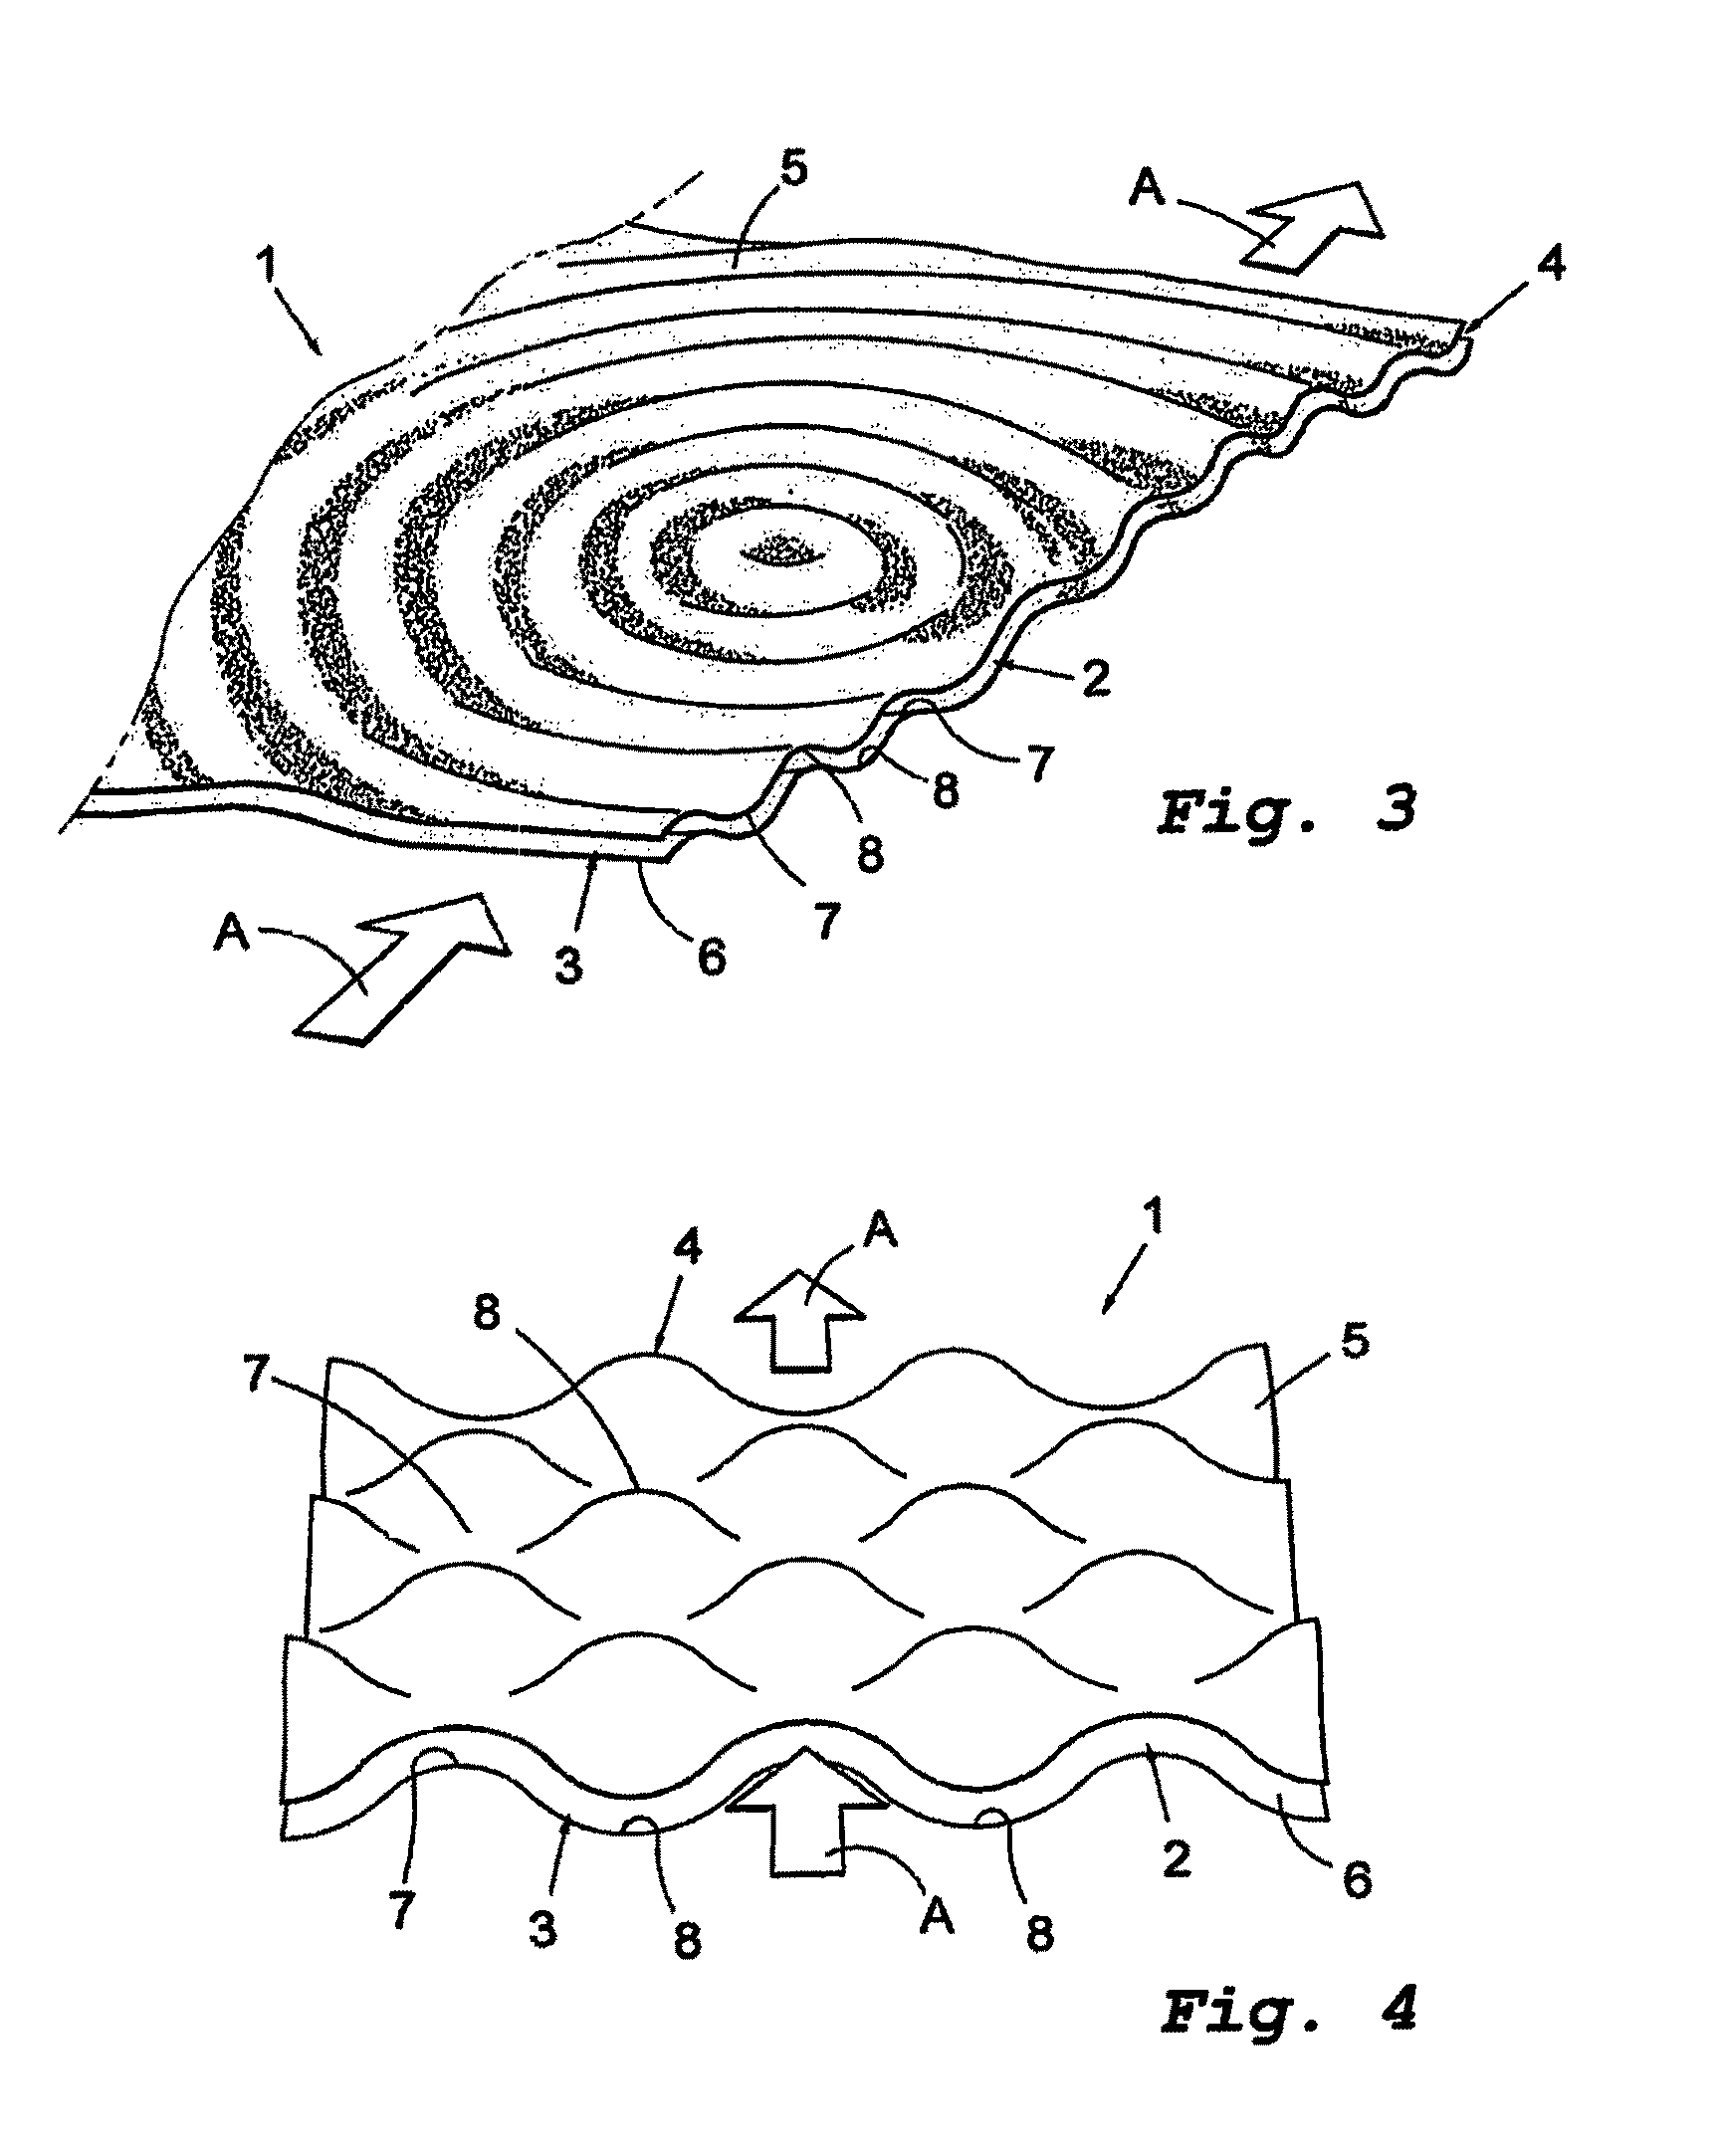 Sound dampening flow channel device